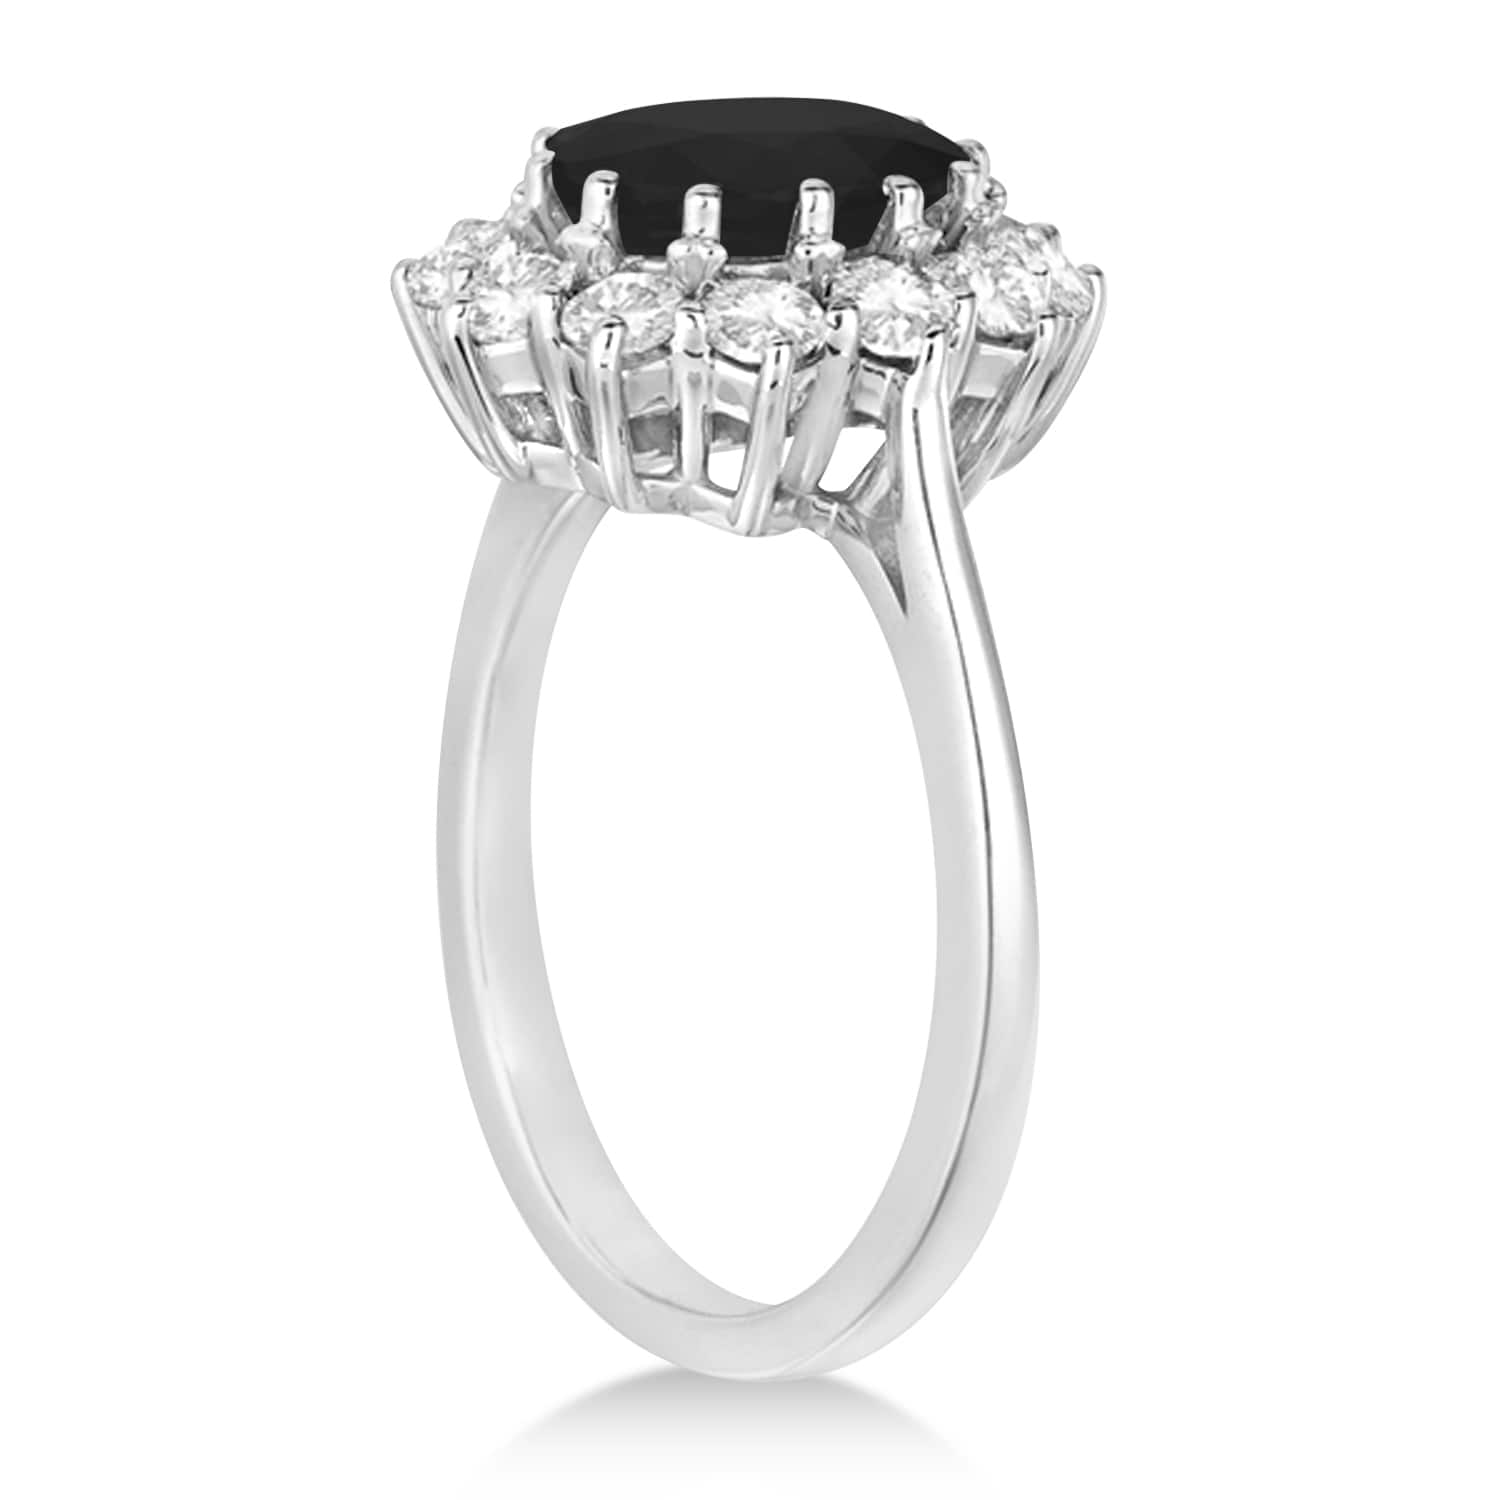 Oval Black & White Diamond Accented Ring 18k White Gold (2.80ctw)